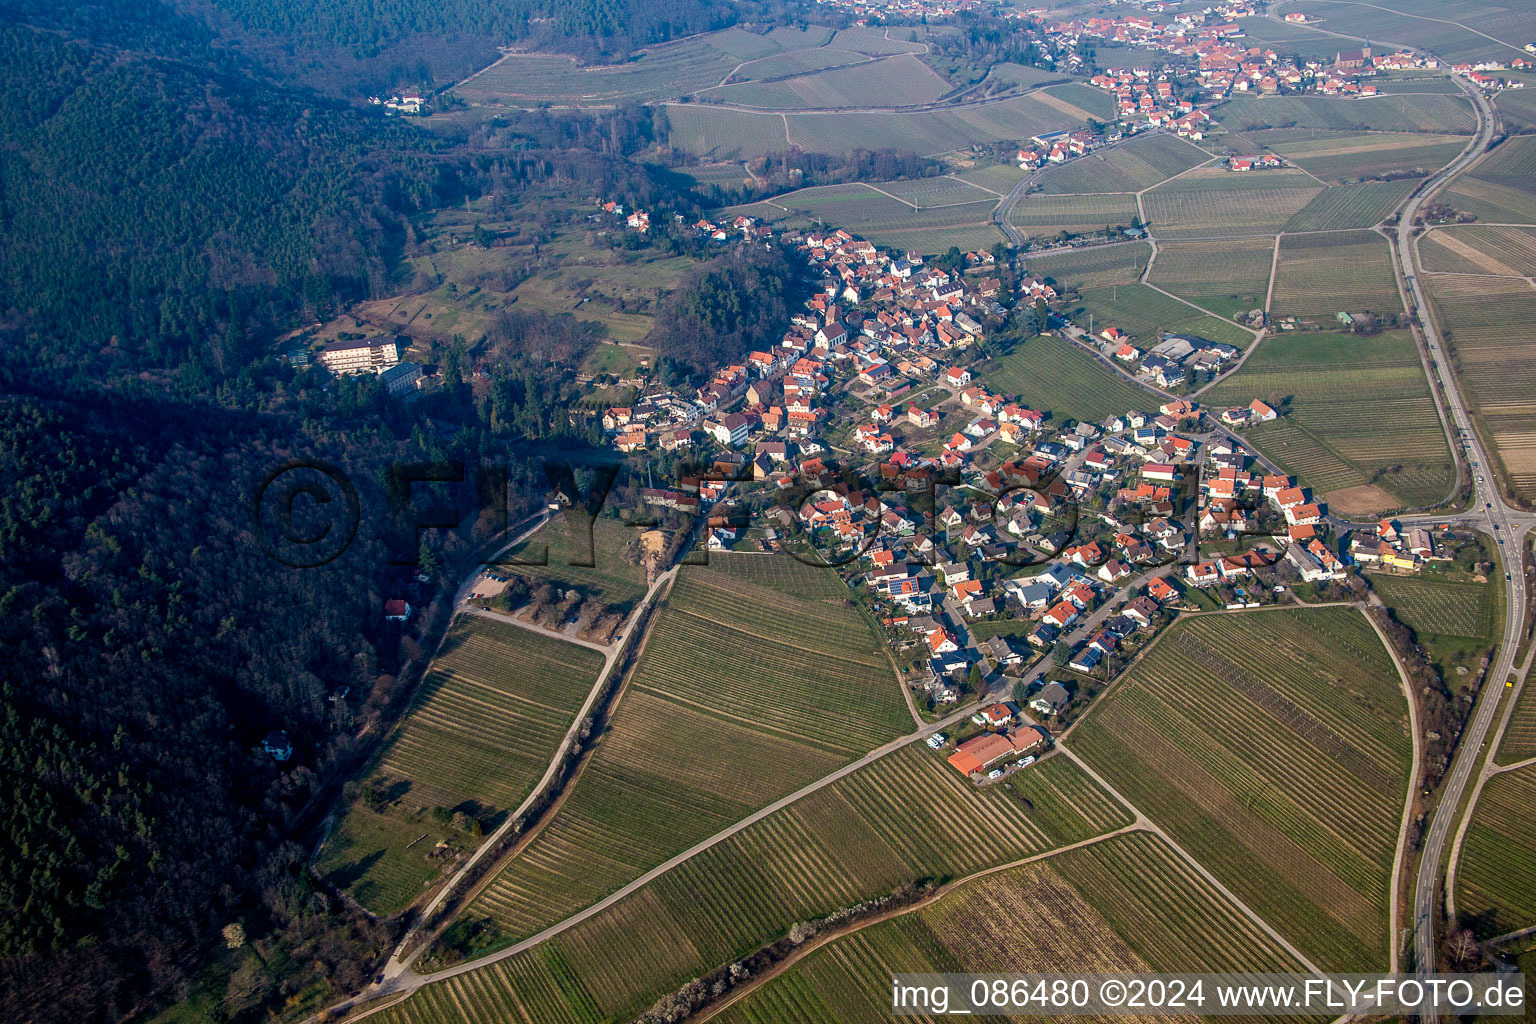 Village - view on the edge of agricultural fields and farmland in Gleisweiler in the state Rhineland-Palatinate, Germany